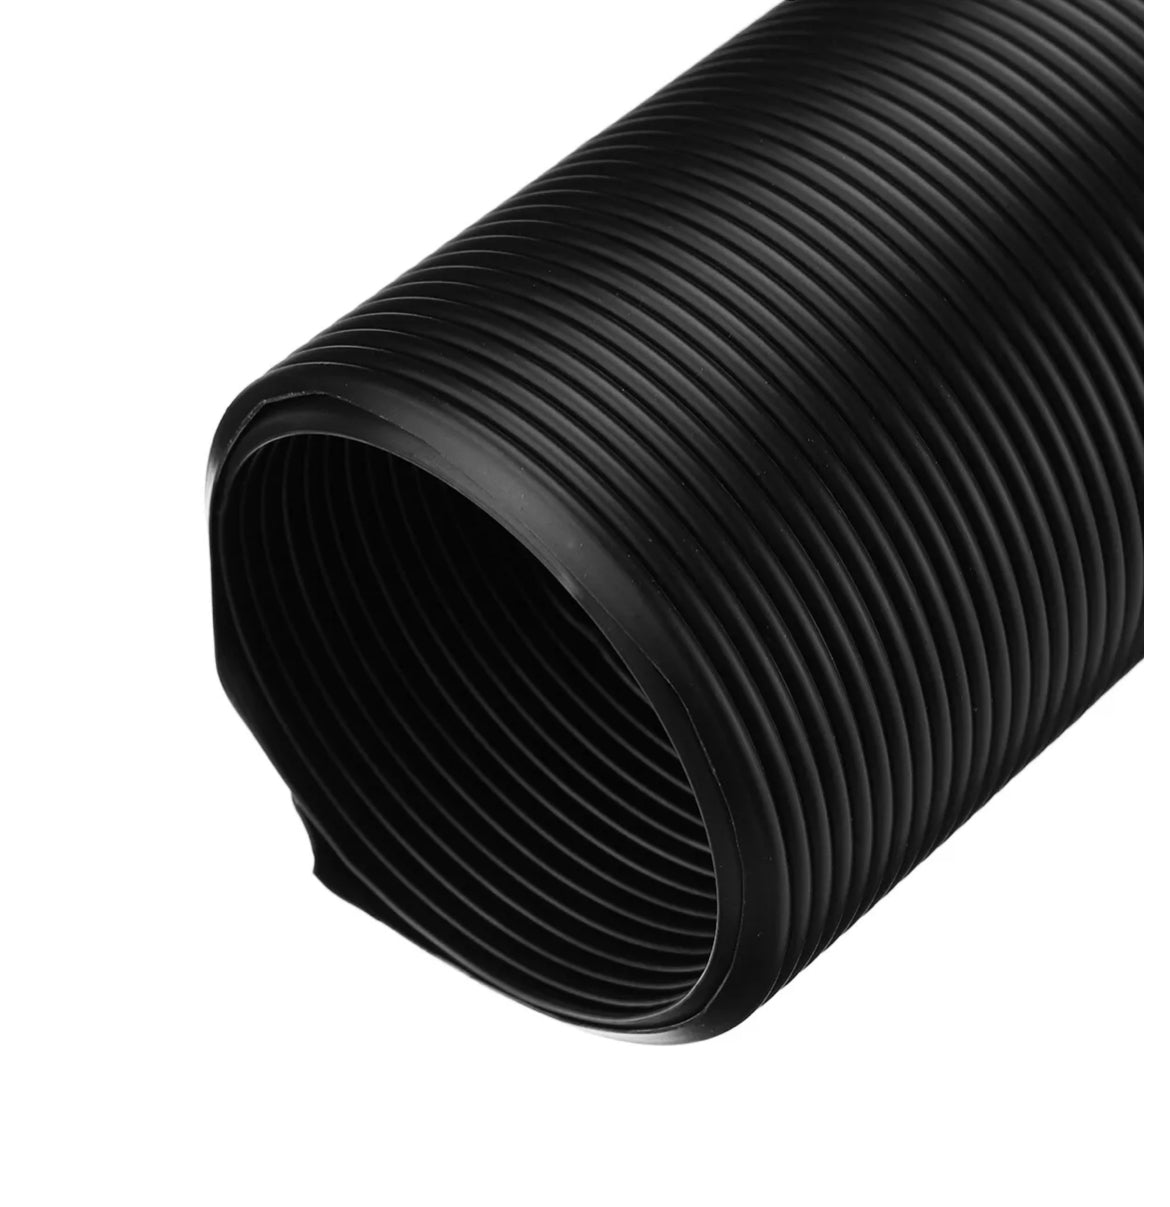 63mm 1M Car Air Intake Cold Pipe Flexible Ducting Feed Hose Induction Kit Black